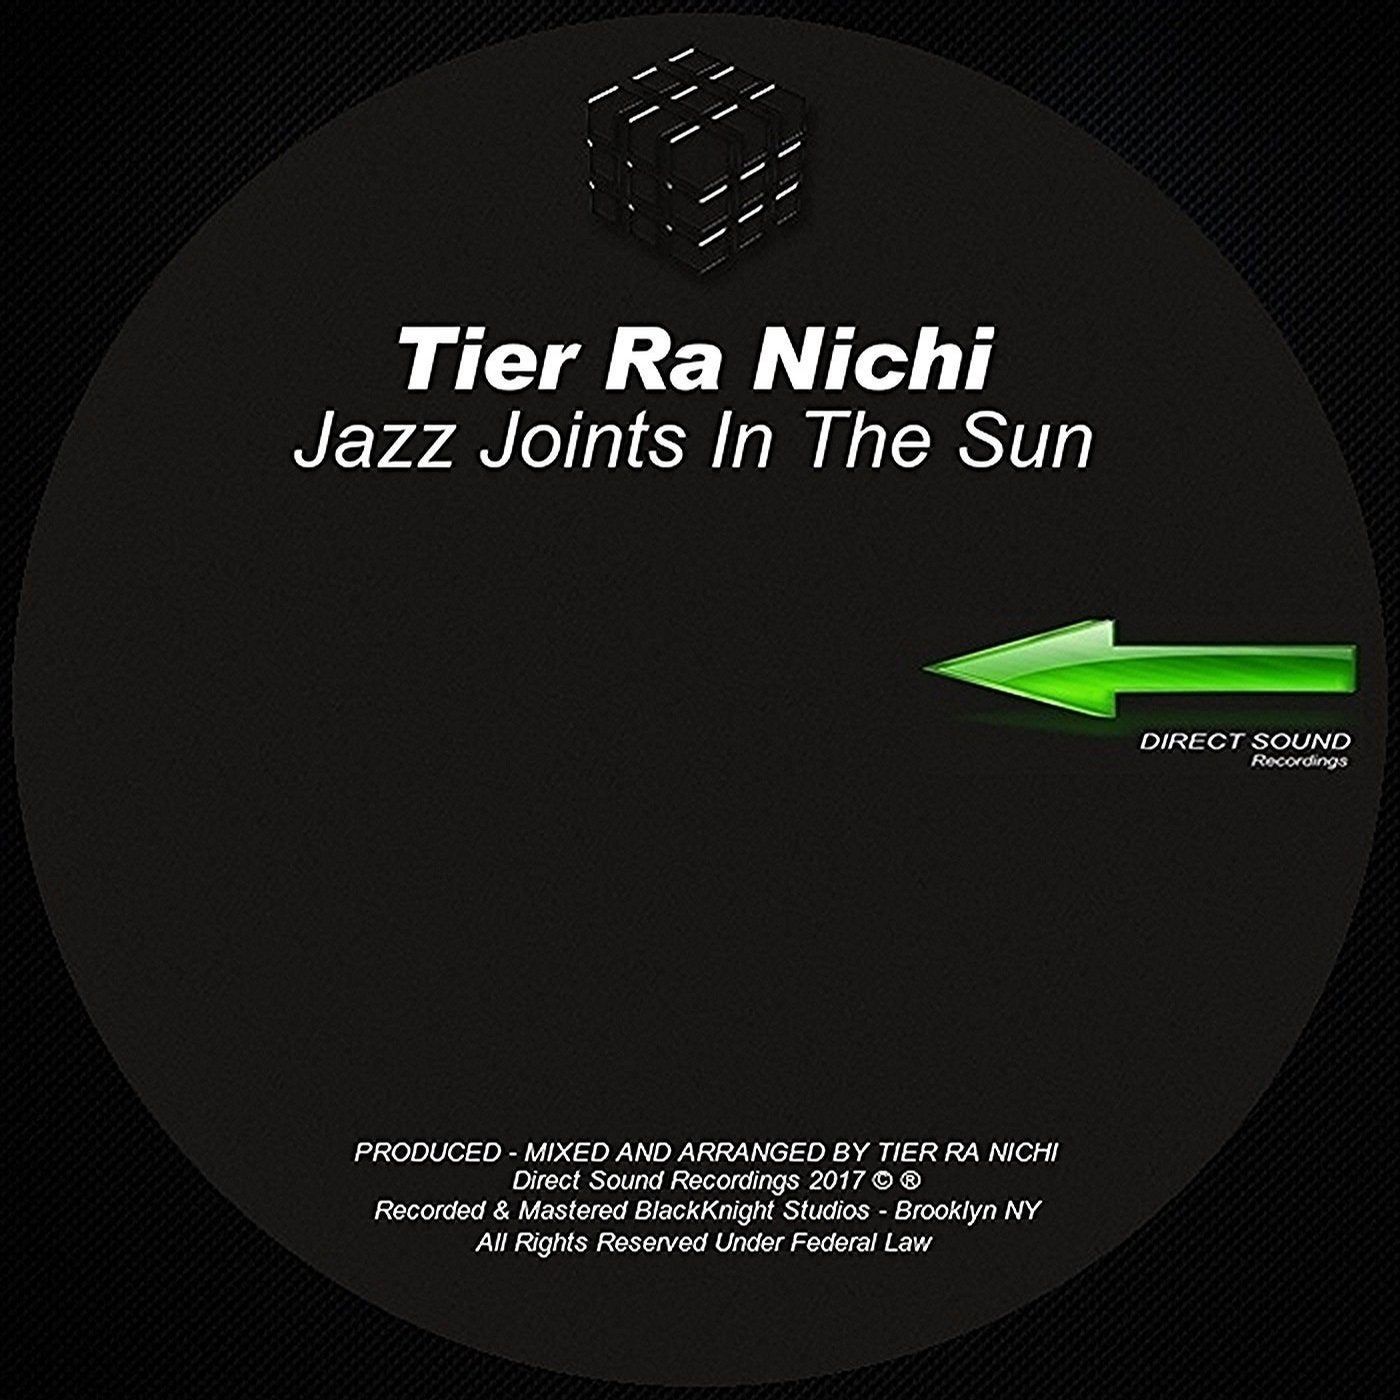 Jazz Joints In The Sun